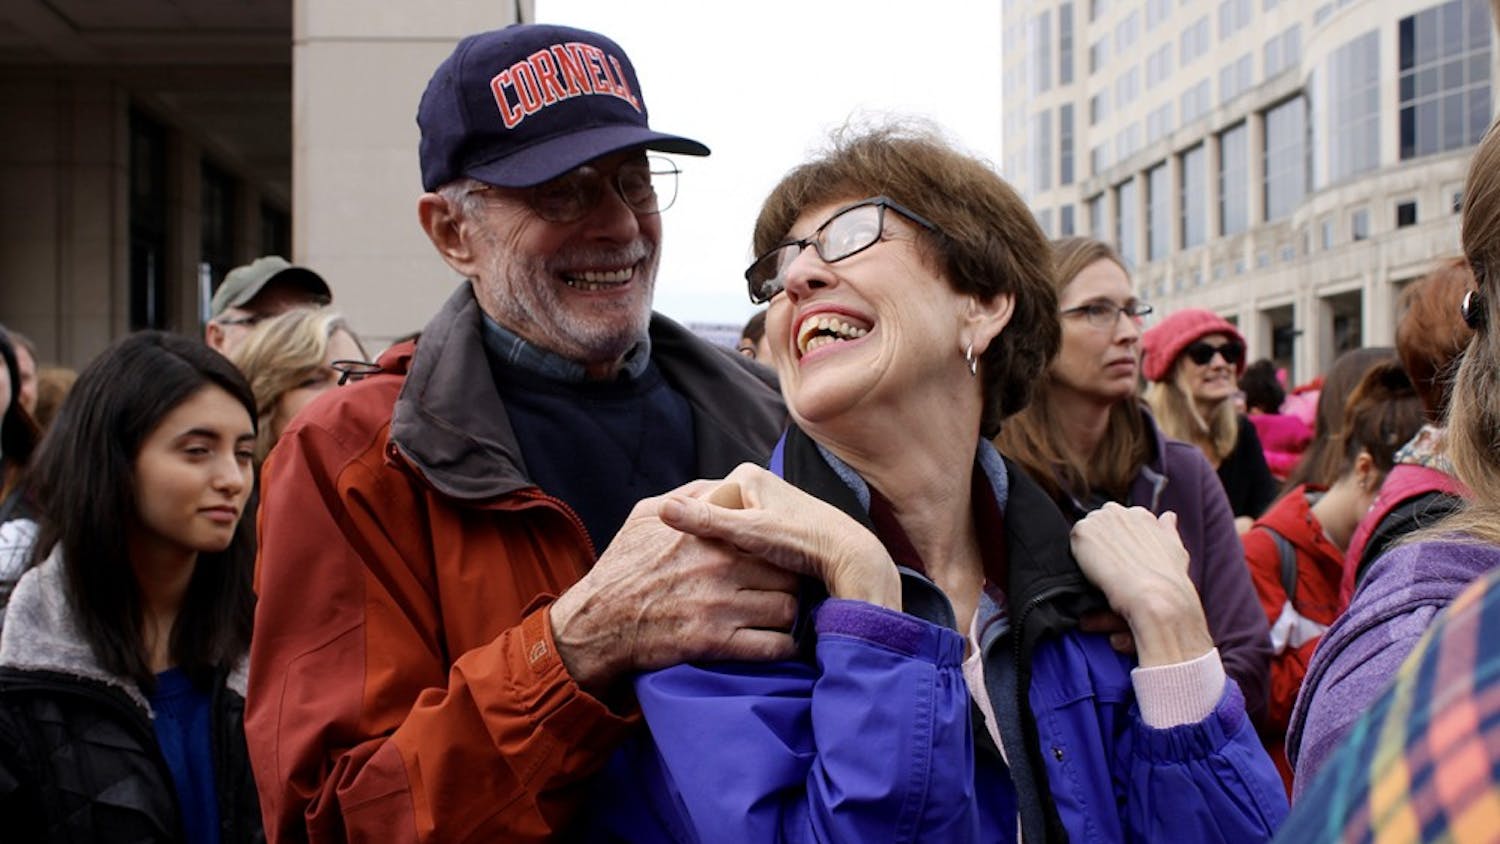 Jan Wolinski Kavensky and her husband, Ken Kavensky Sr., have been married for 33 years. They attended the Women's March in Indianapolis together.